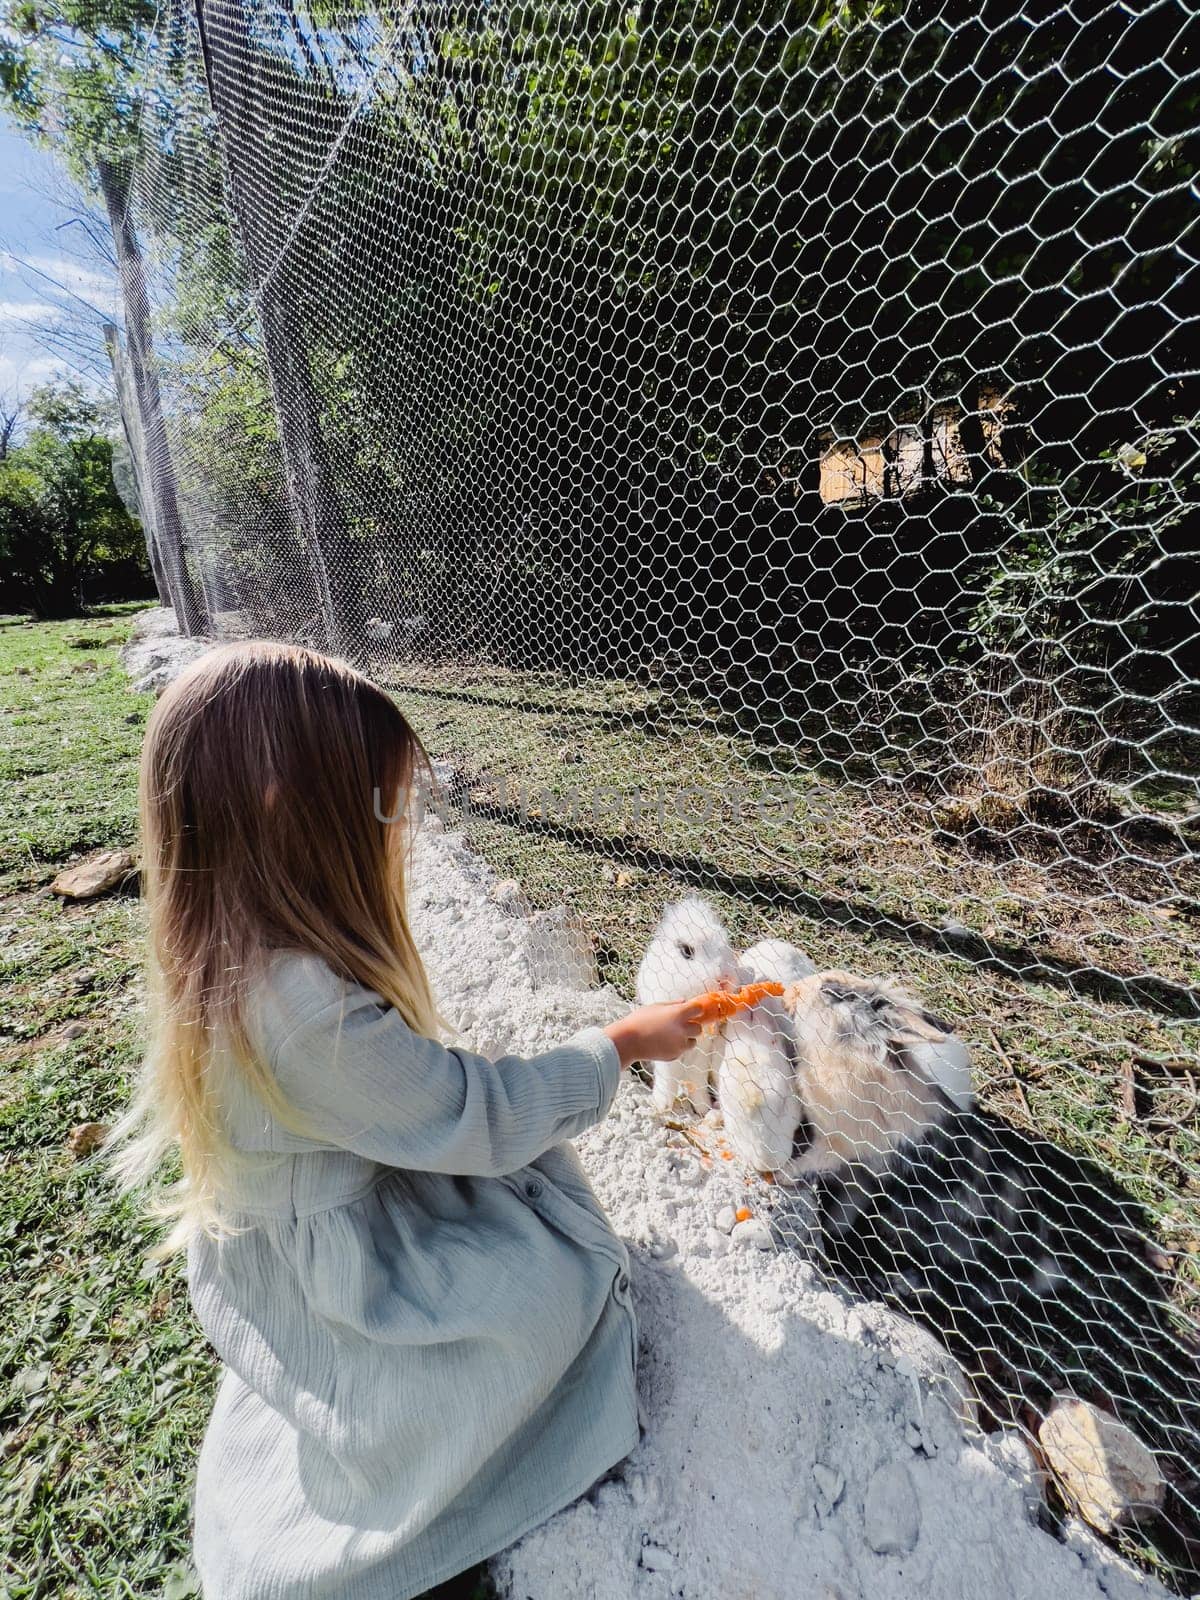 Little girl pushing a carrot to white rabbits through a net on a farm by Nadtochiy